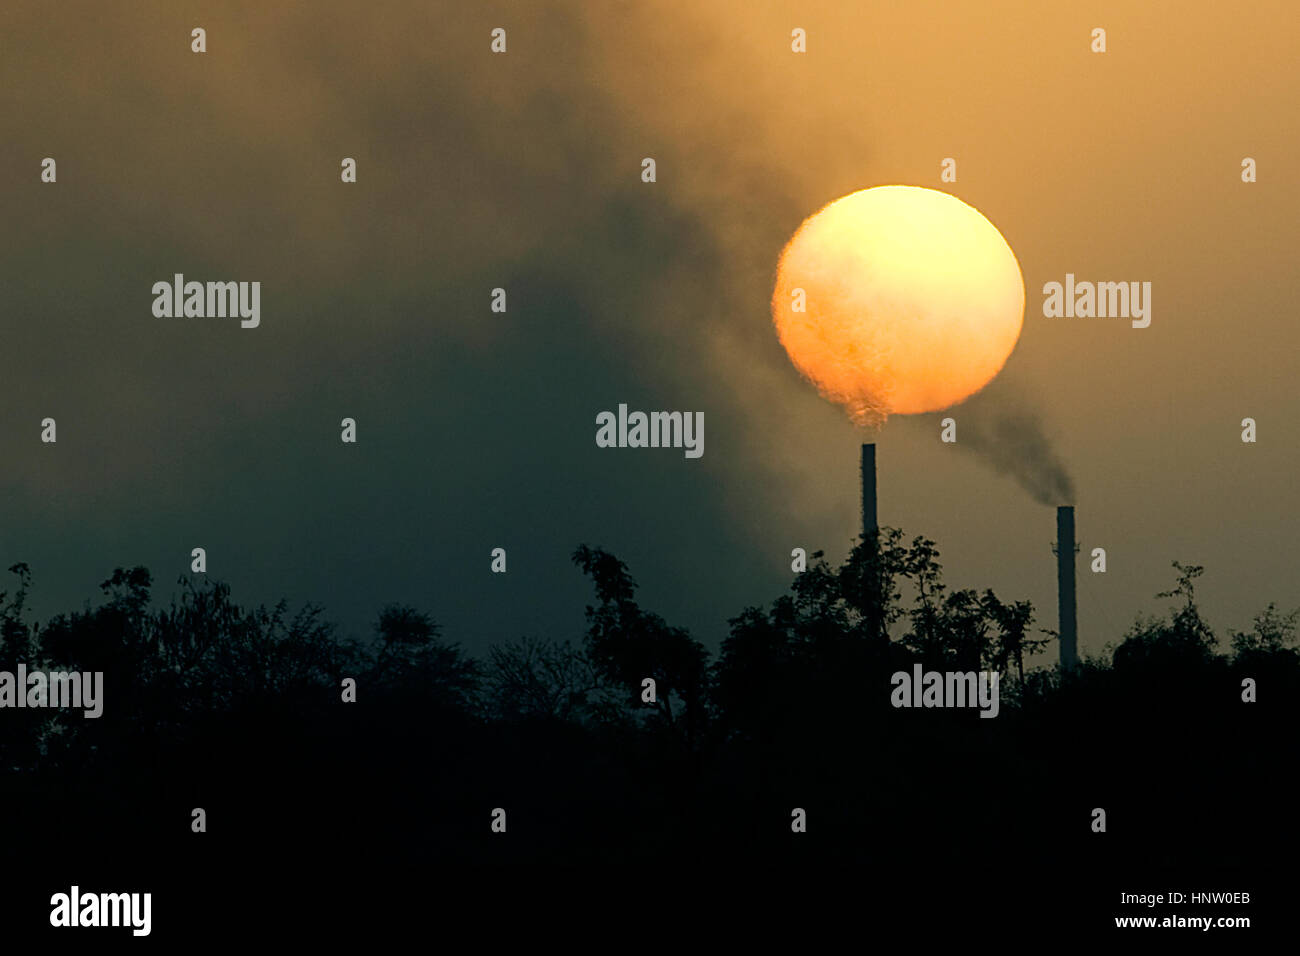 Thick black smoke coming out of chimneys/industy against setting sun, blurring some part of the sun, looks like melting Sun, trees in foreground Stock Photo